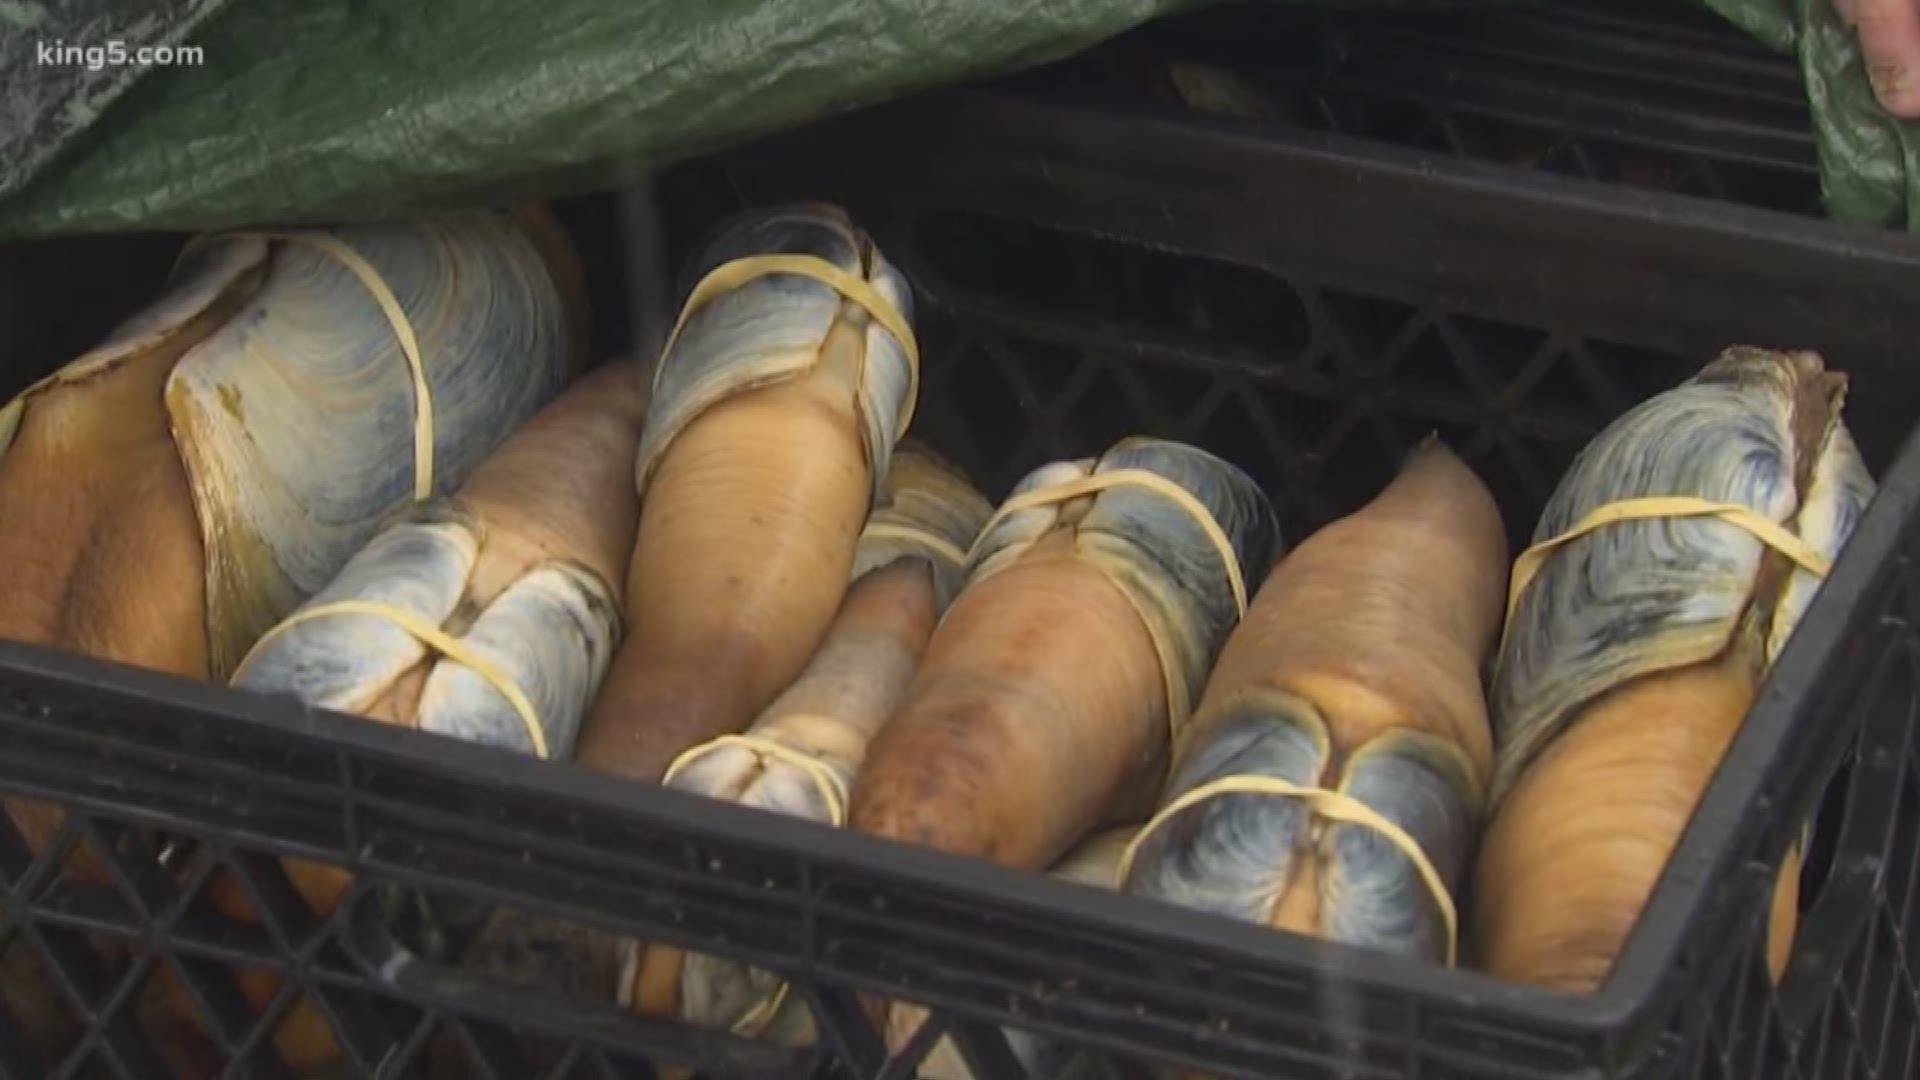 The price of geoduck has dropped from 10 to six dollars a pound since Chinese tariffs went into affect in July of 2018.